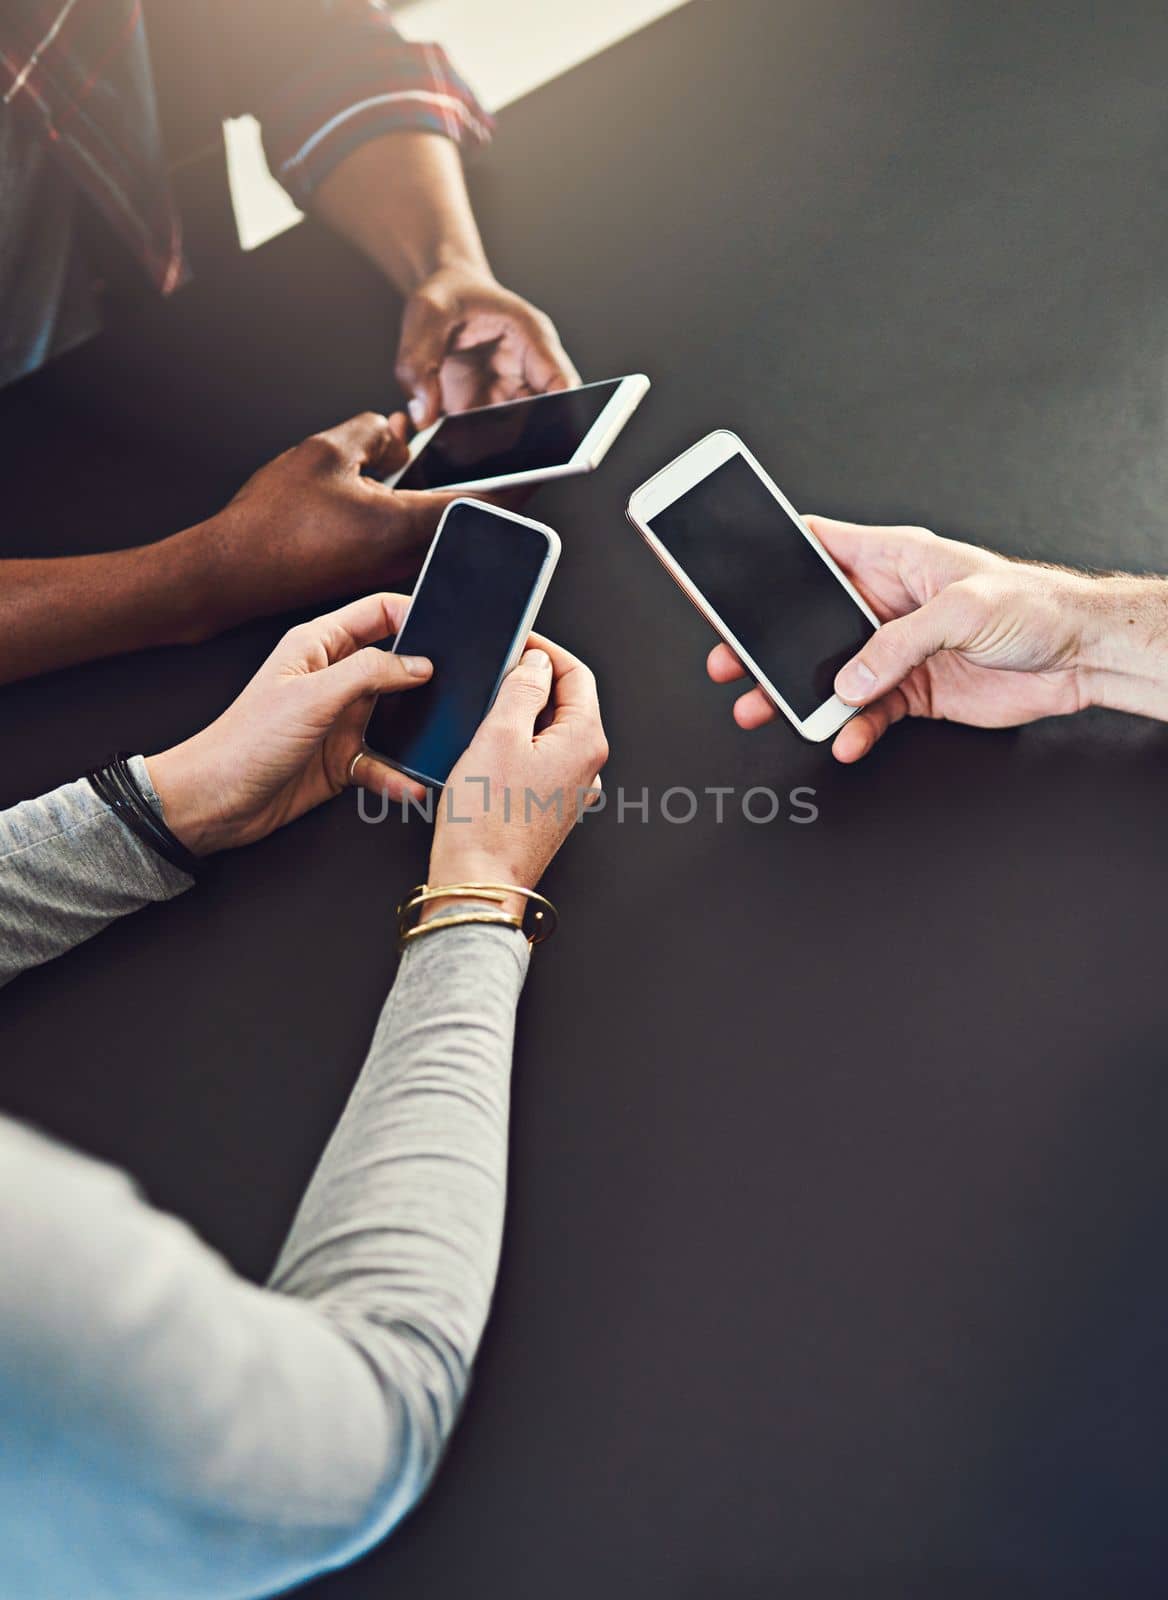 Working with technology as a team. three people sitting around a table together and using their cellphones